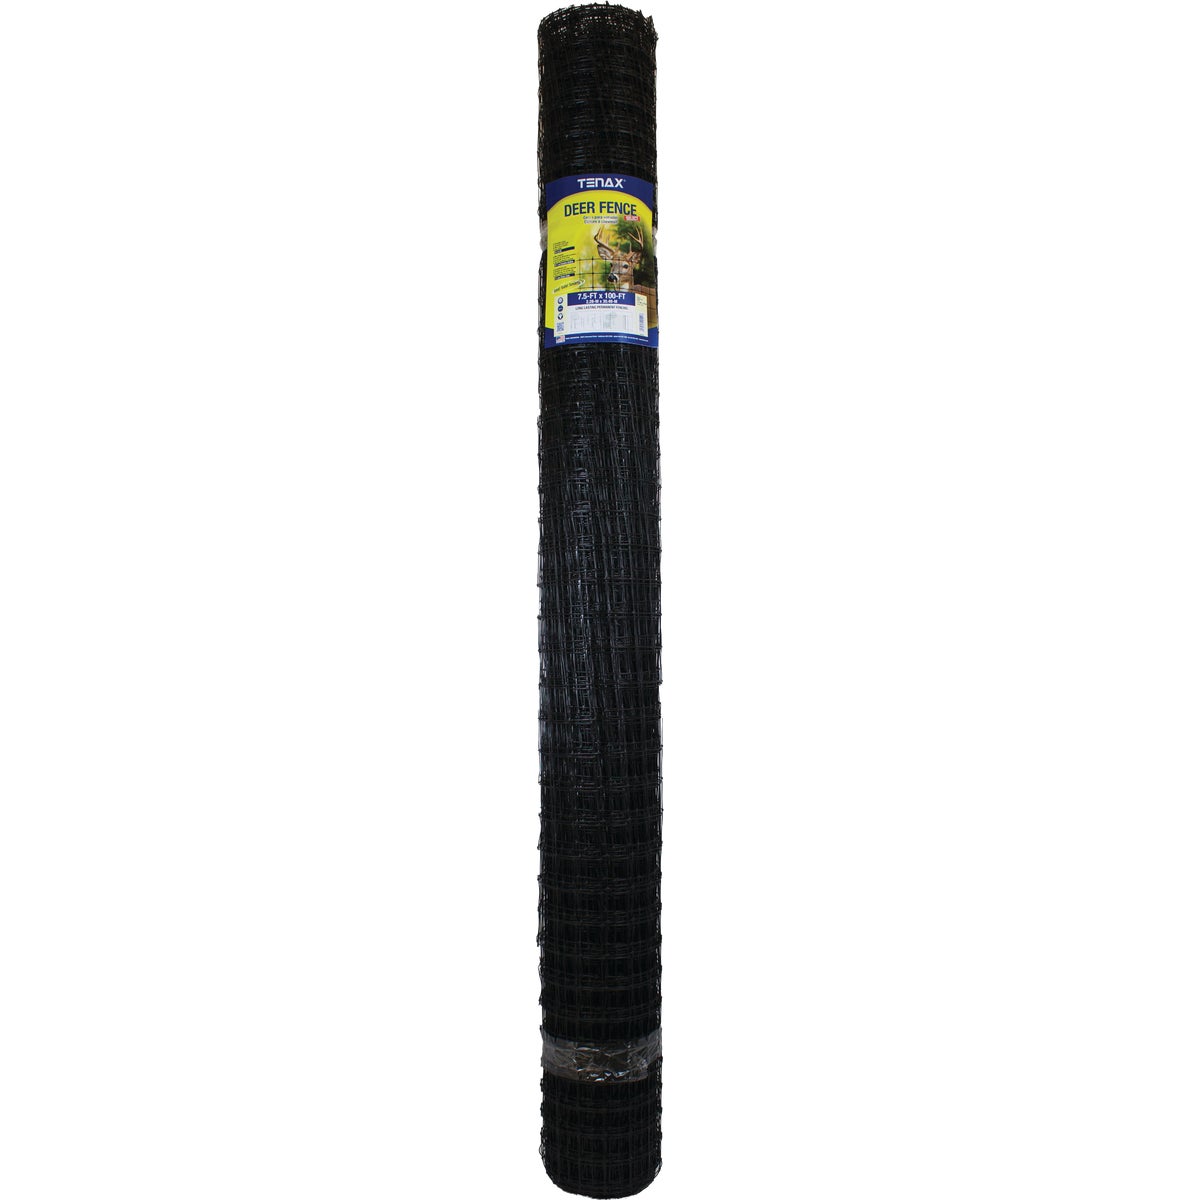 Item 734455, A heavy-grade netting with a mesh size of 1.77 inch x 1.96 inch.